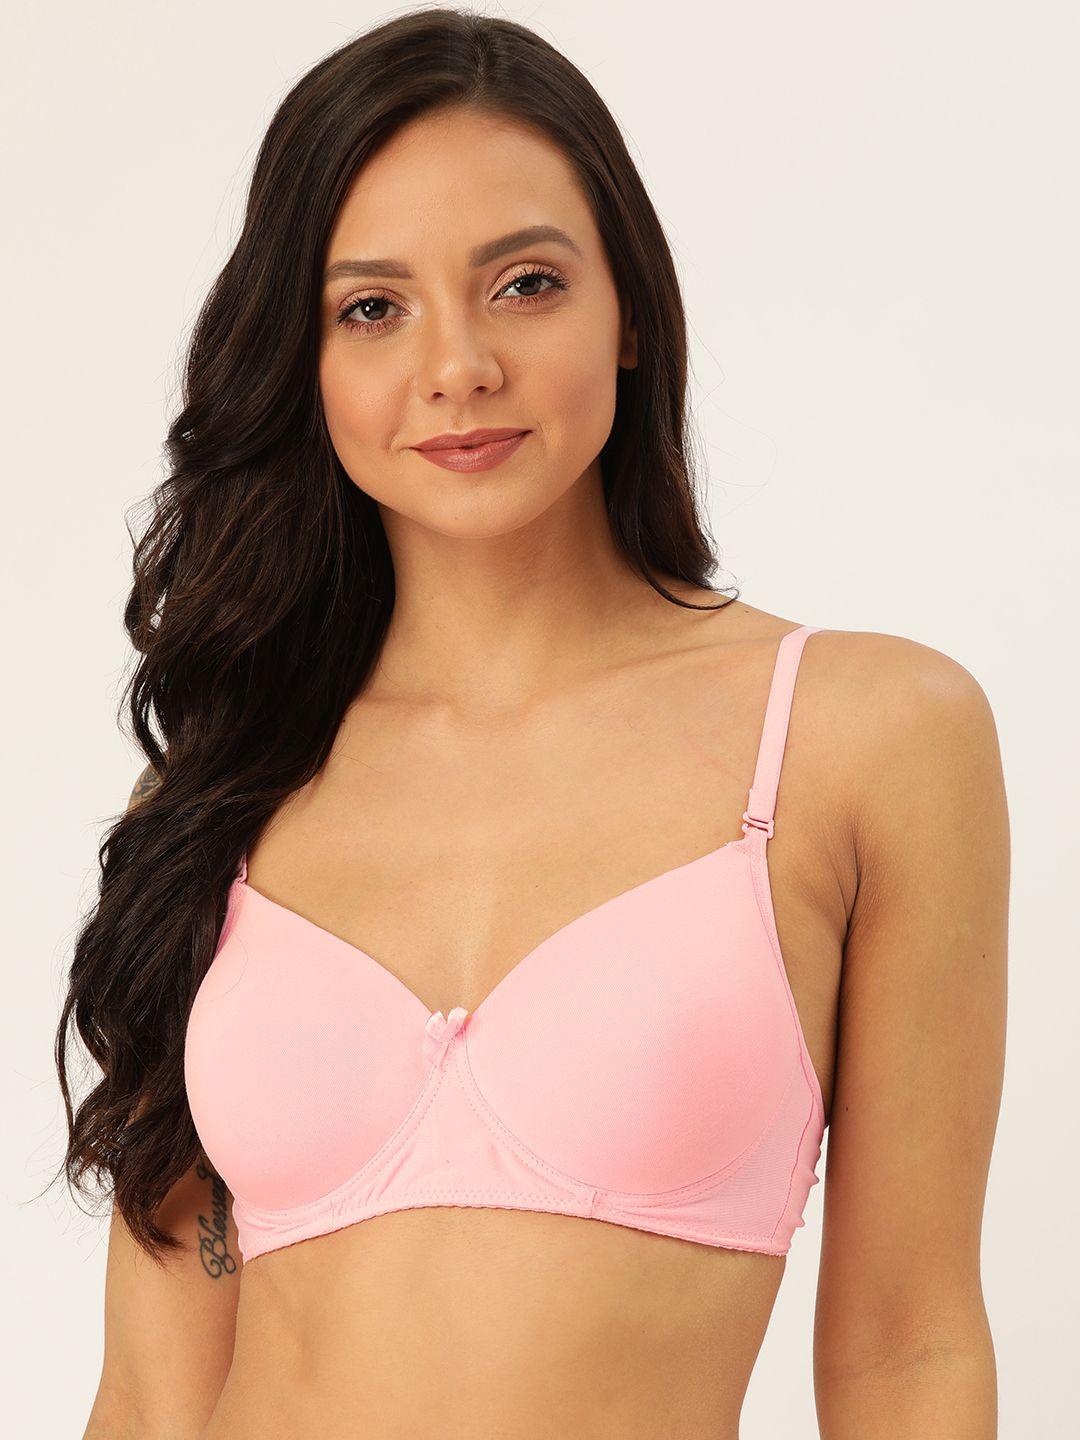 lady lyka pink solid non-wired lightly padded t-shirt bra white-rose